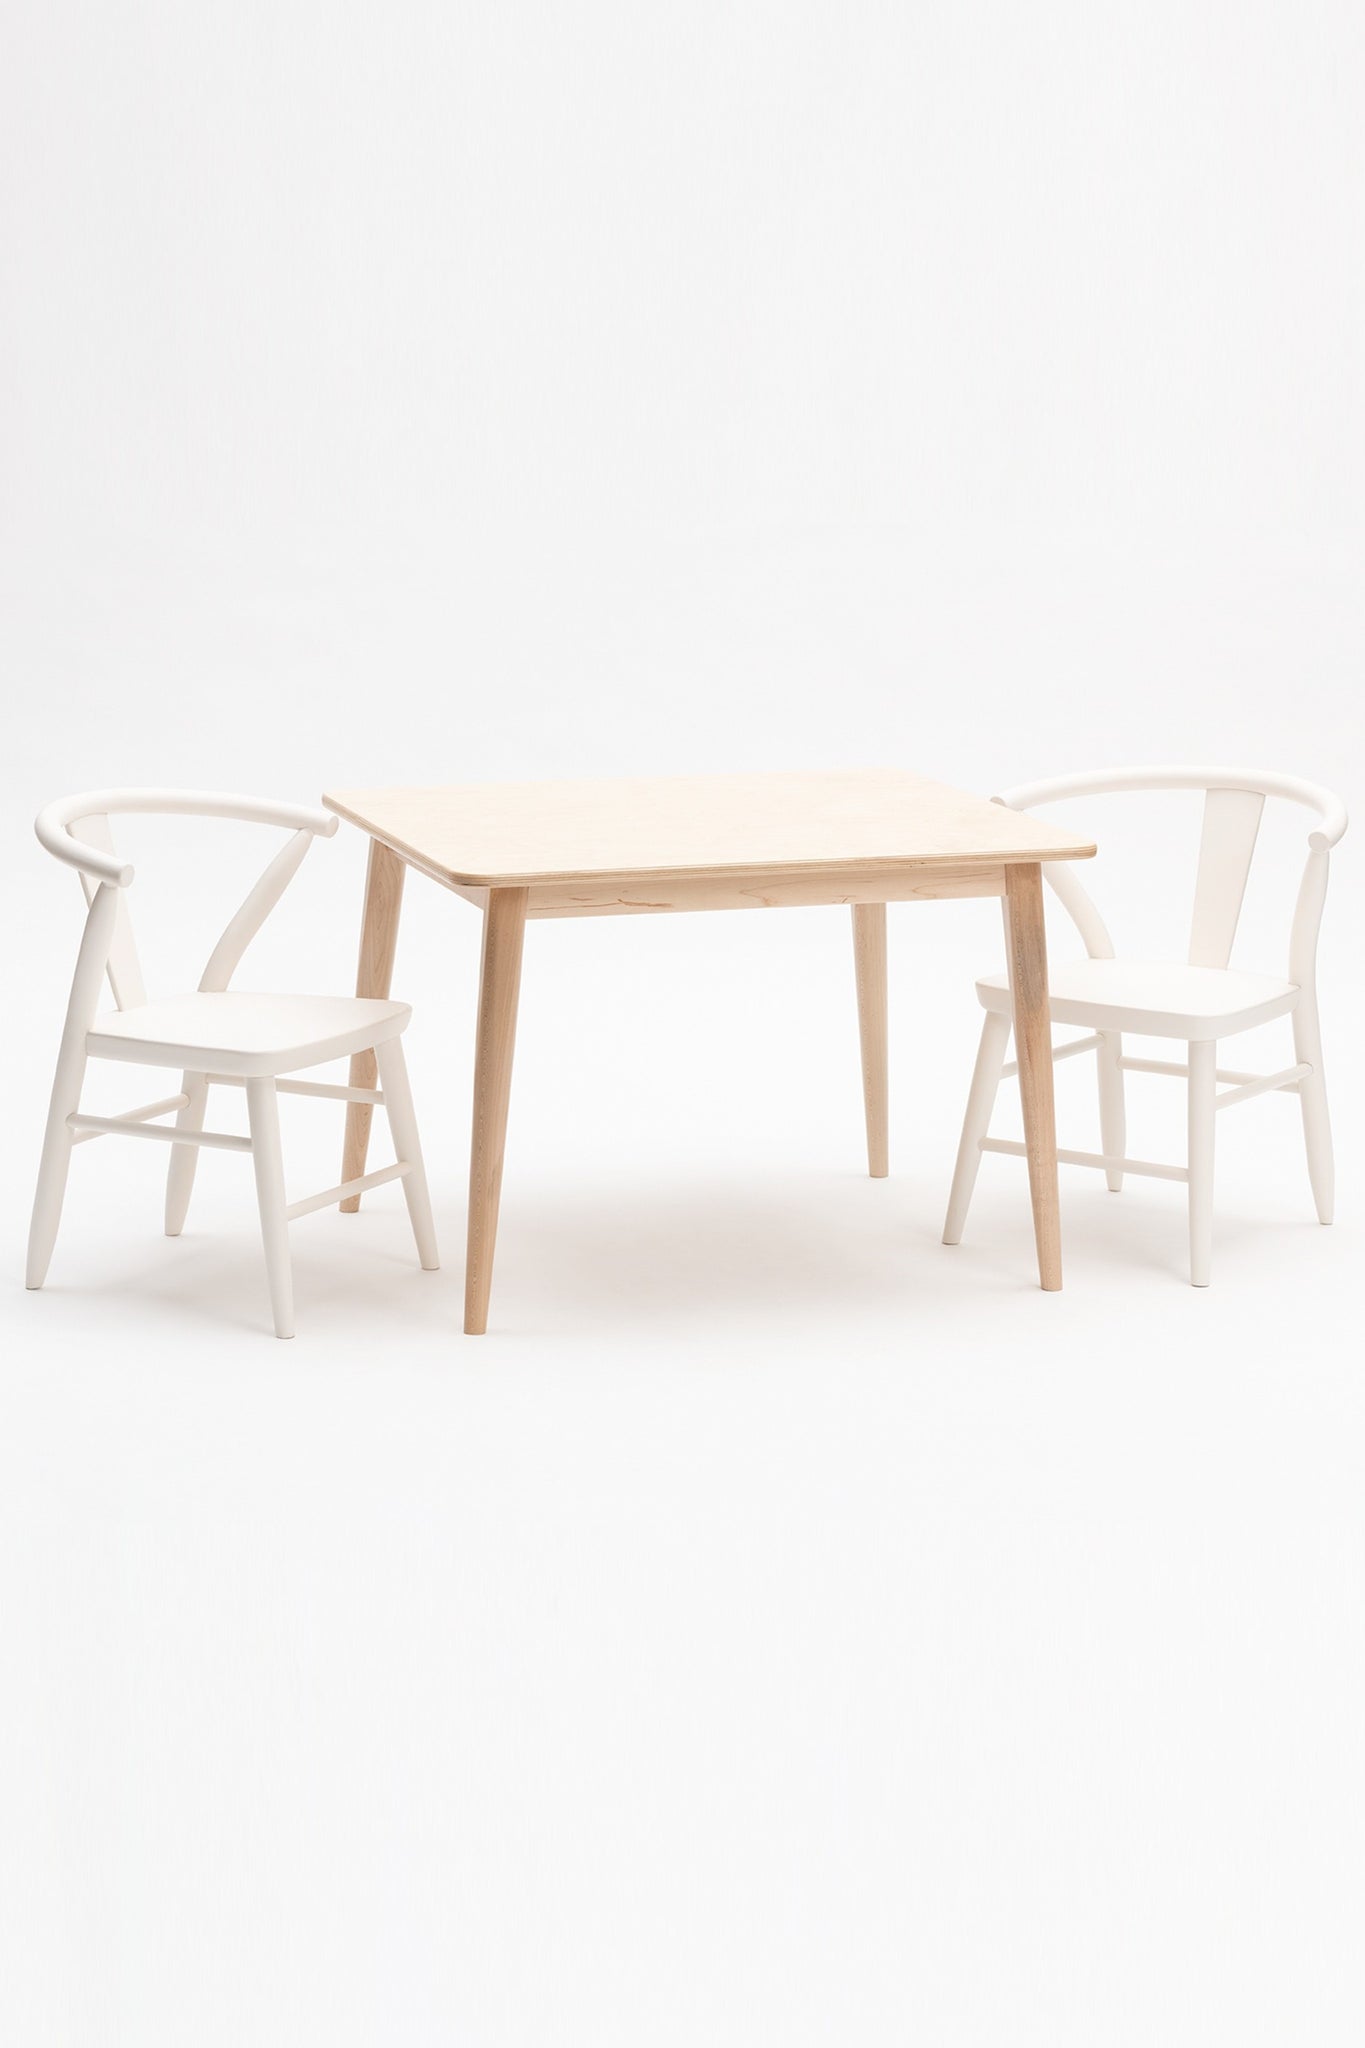 Milton and Goose Crescent Children's table in natural wood finish and chairs painted in white.  Made with sustainable materials and non-toxic finishes.